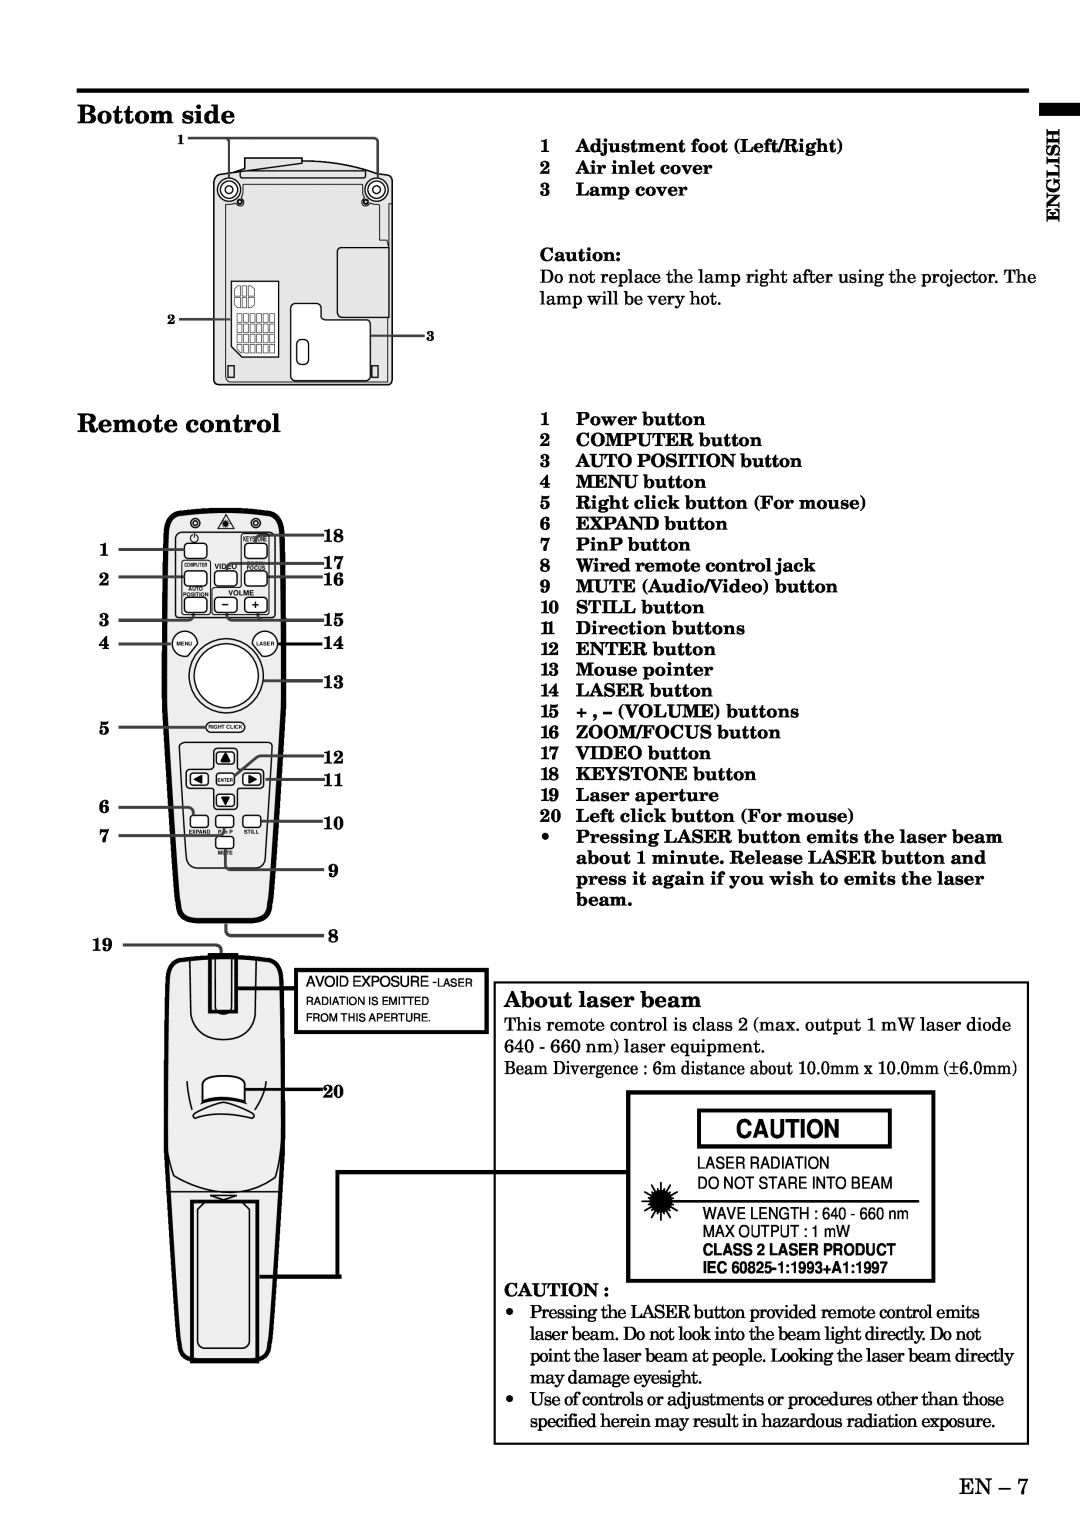 Mitsubishi Electronics X500 Bottom side, Remote control, About laser beam, Adjustment foot Left/Right, English, Lamp cover 